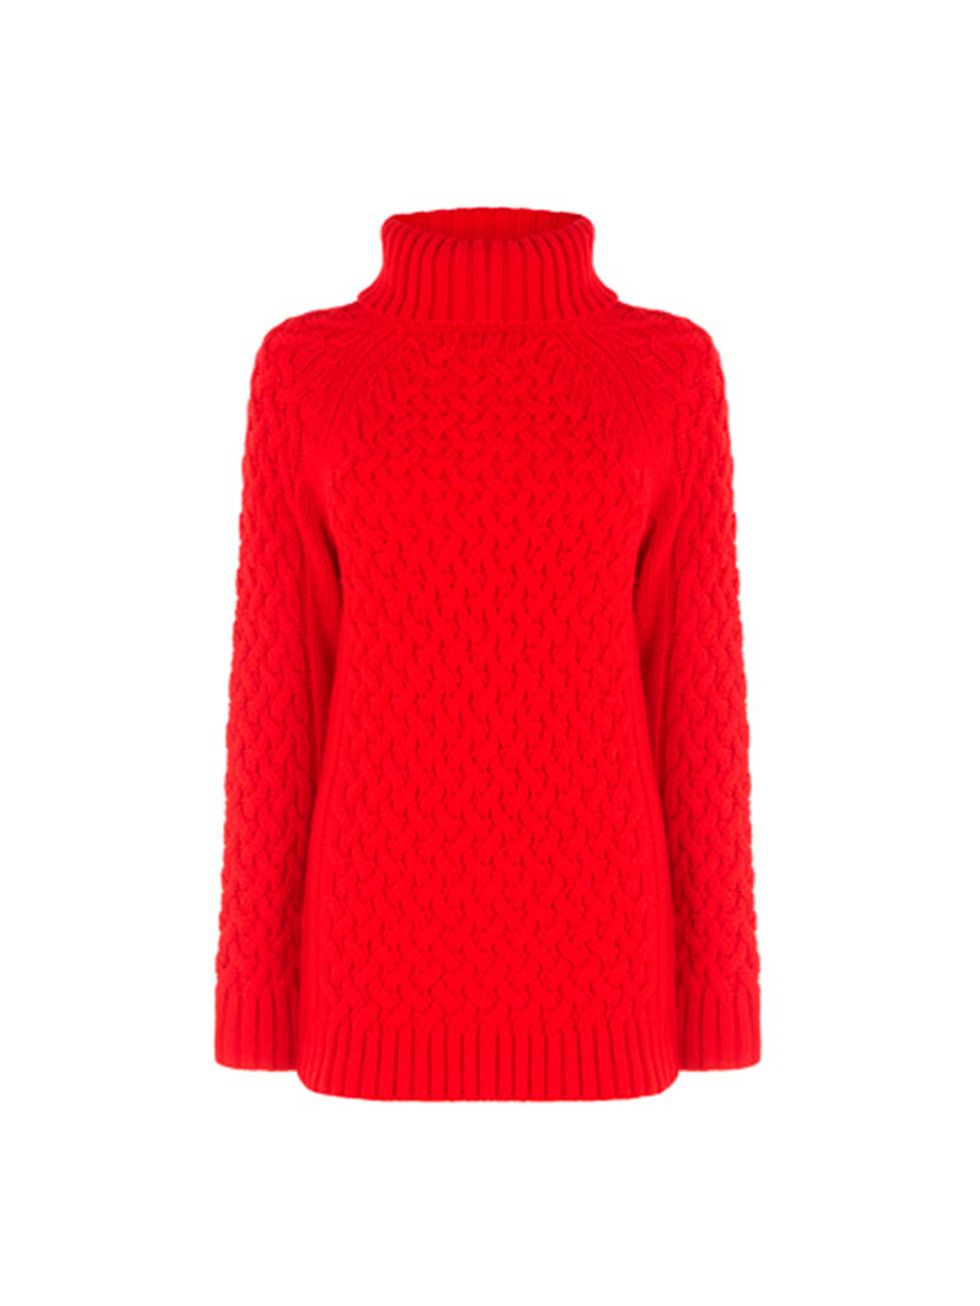 <p>Nothing says Christmas quite like a red poloneck. Just add matching red lippy and statement earrings.</p>

<p><a href="http://www.warehouse.co.uk///warehouse/fcp-product/6380030161" target="_blank">Warehouse</a> poloneck, £42</p>